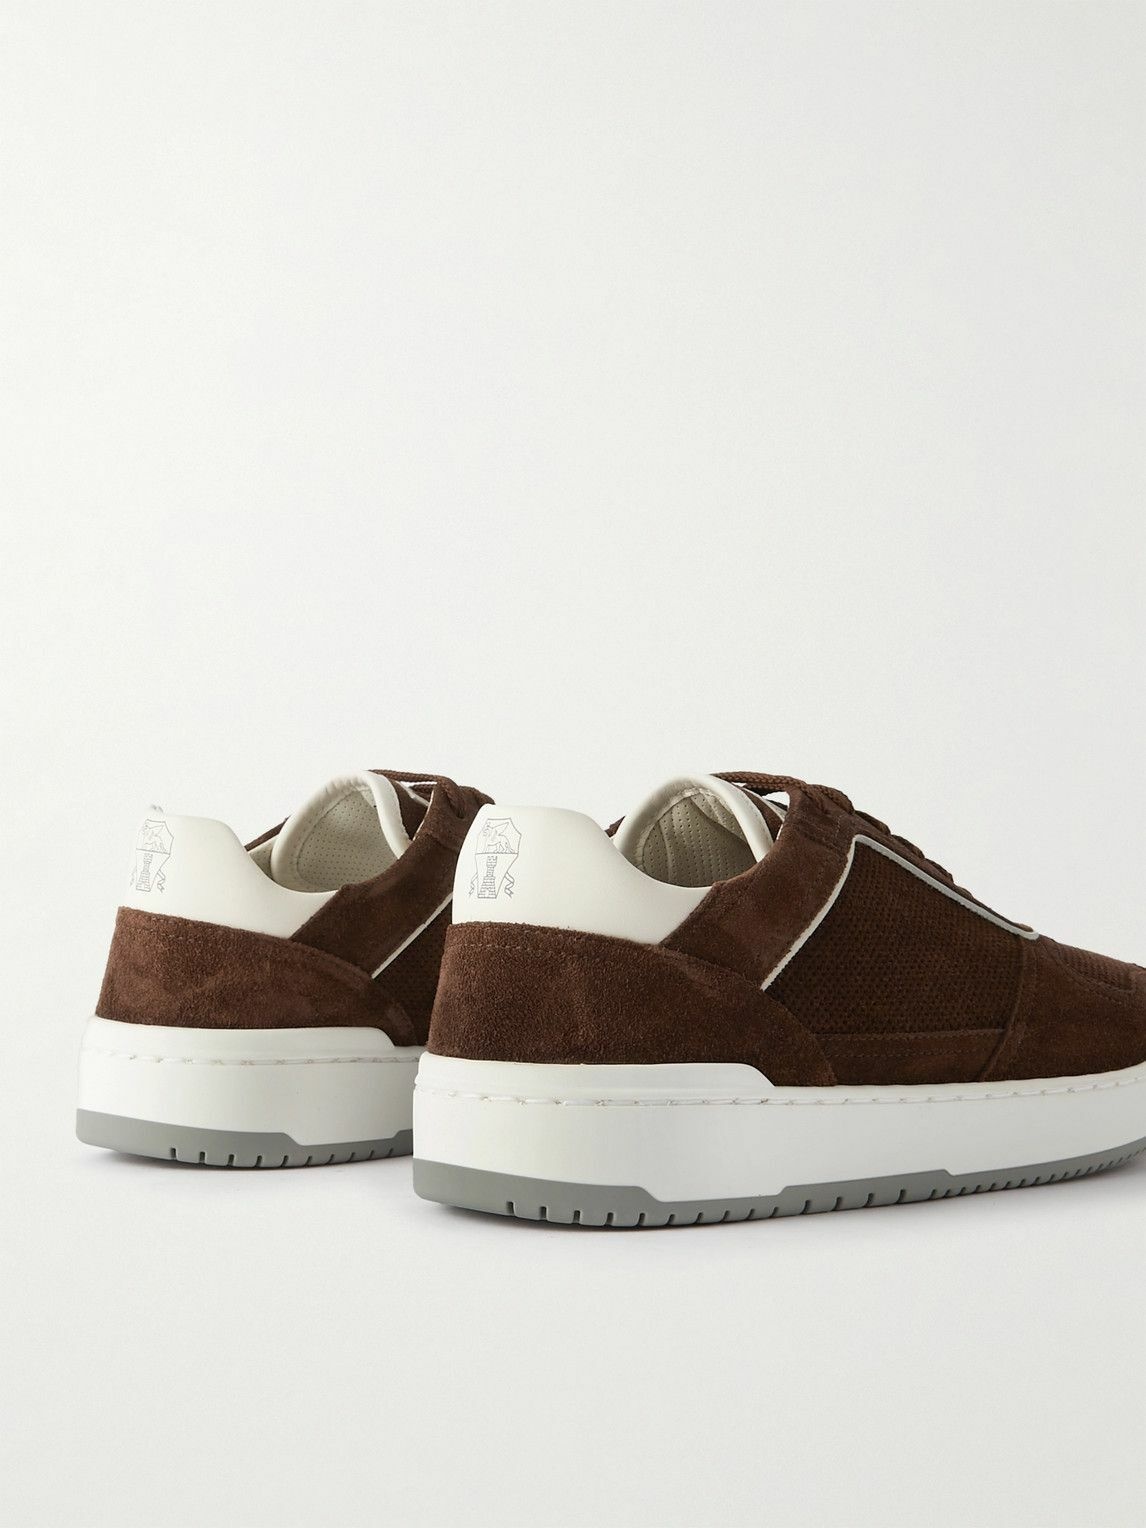 Brunello Cucinelli - Suede-Trimmed Perforated Leather Sneakers - Brown ...